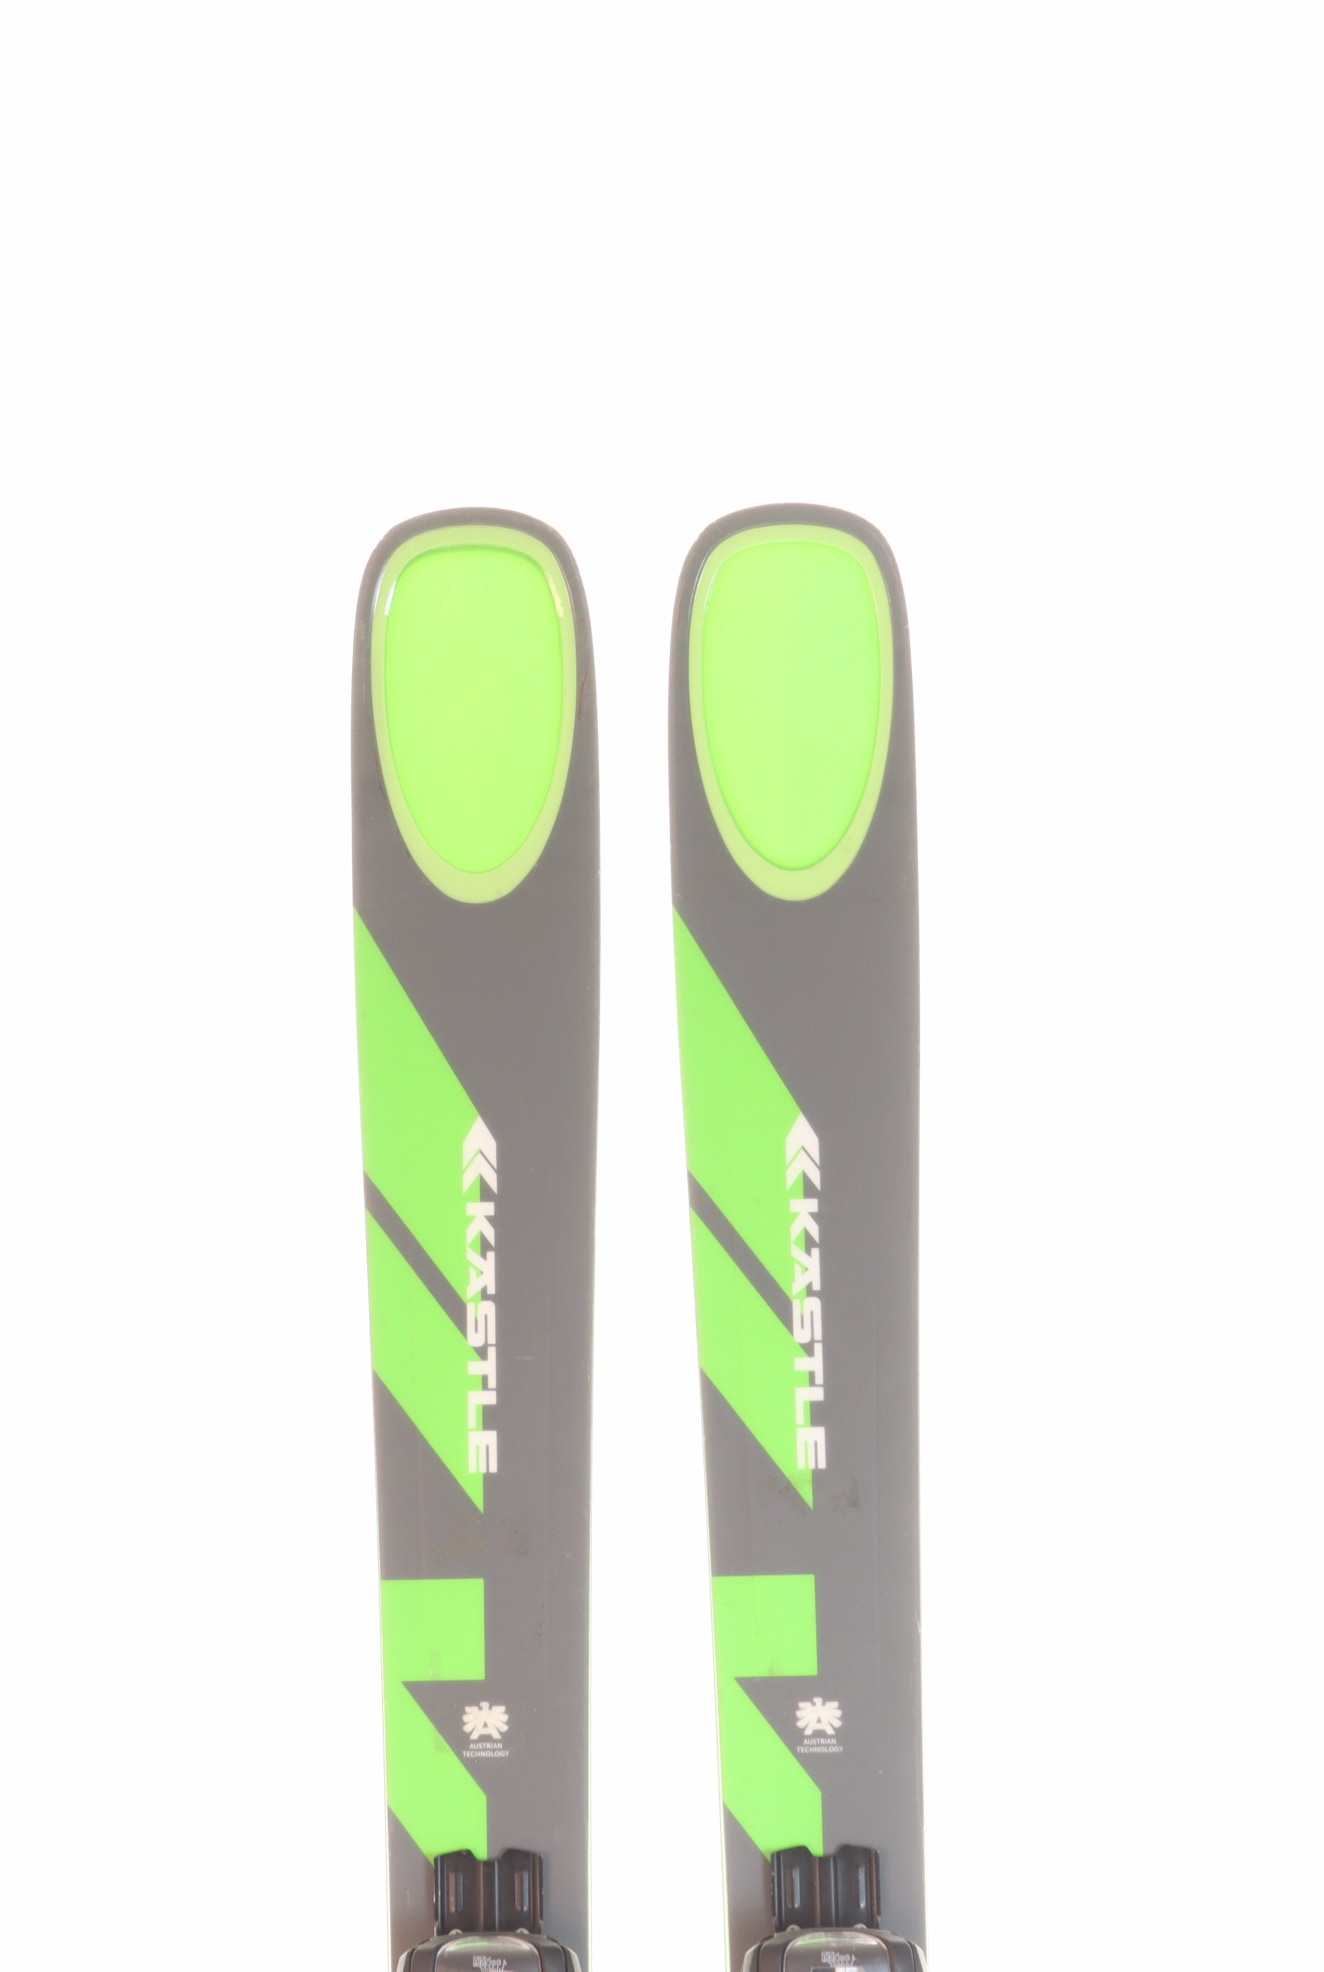 Used 2021 Kastle FX 106 HP Skis With Tyrolia Attack 14 Bindings Size 168 (Option 230678)